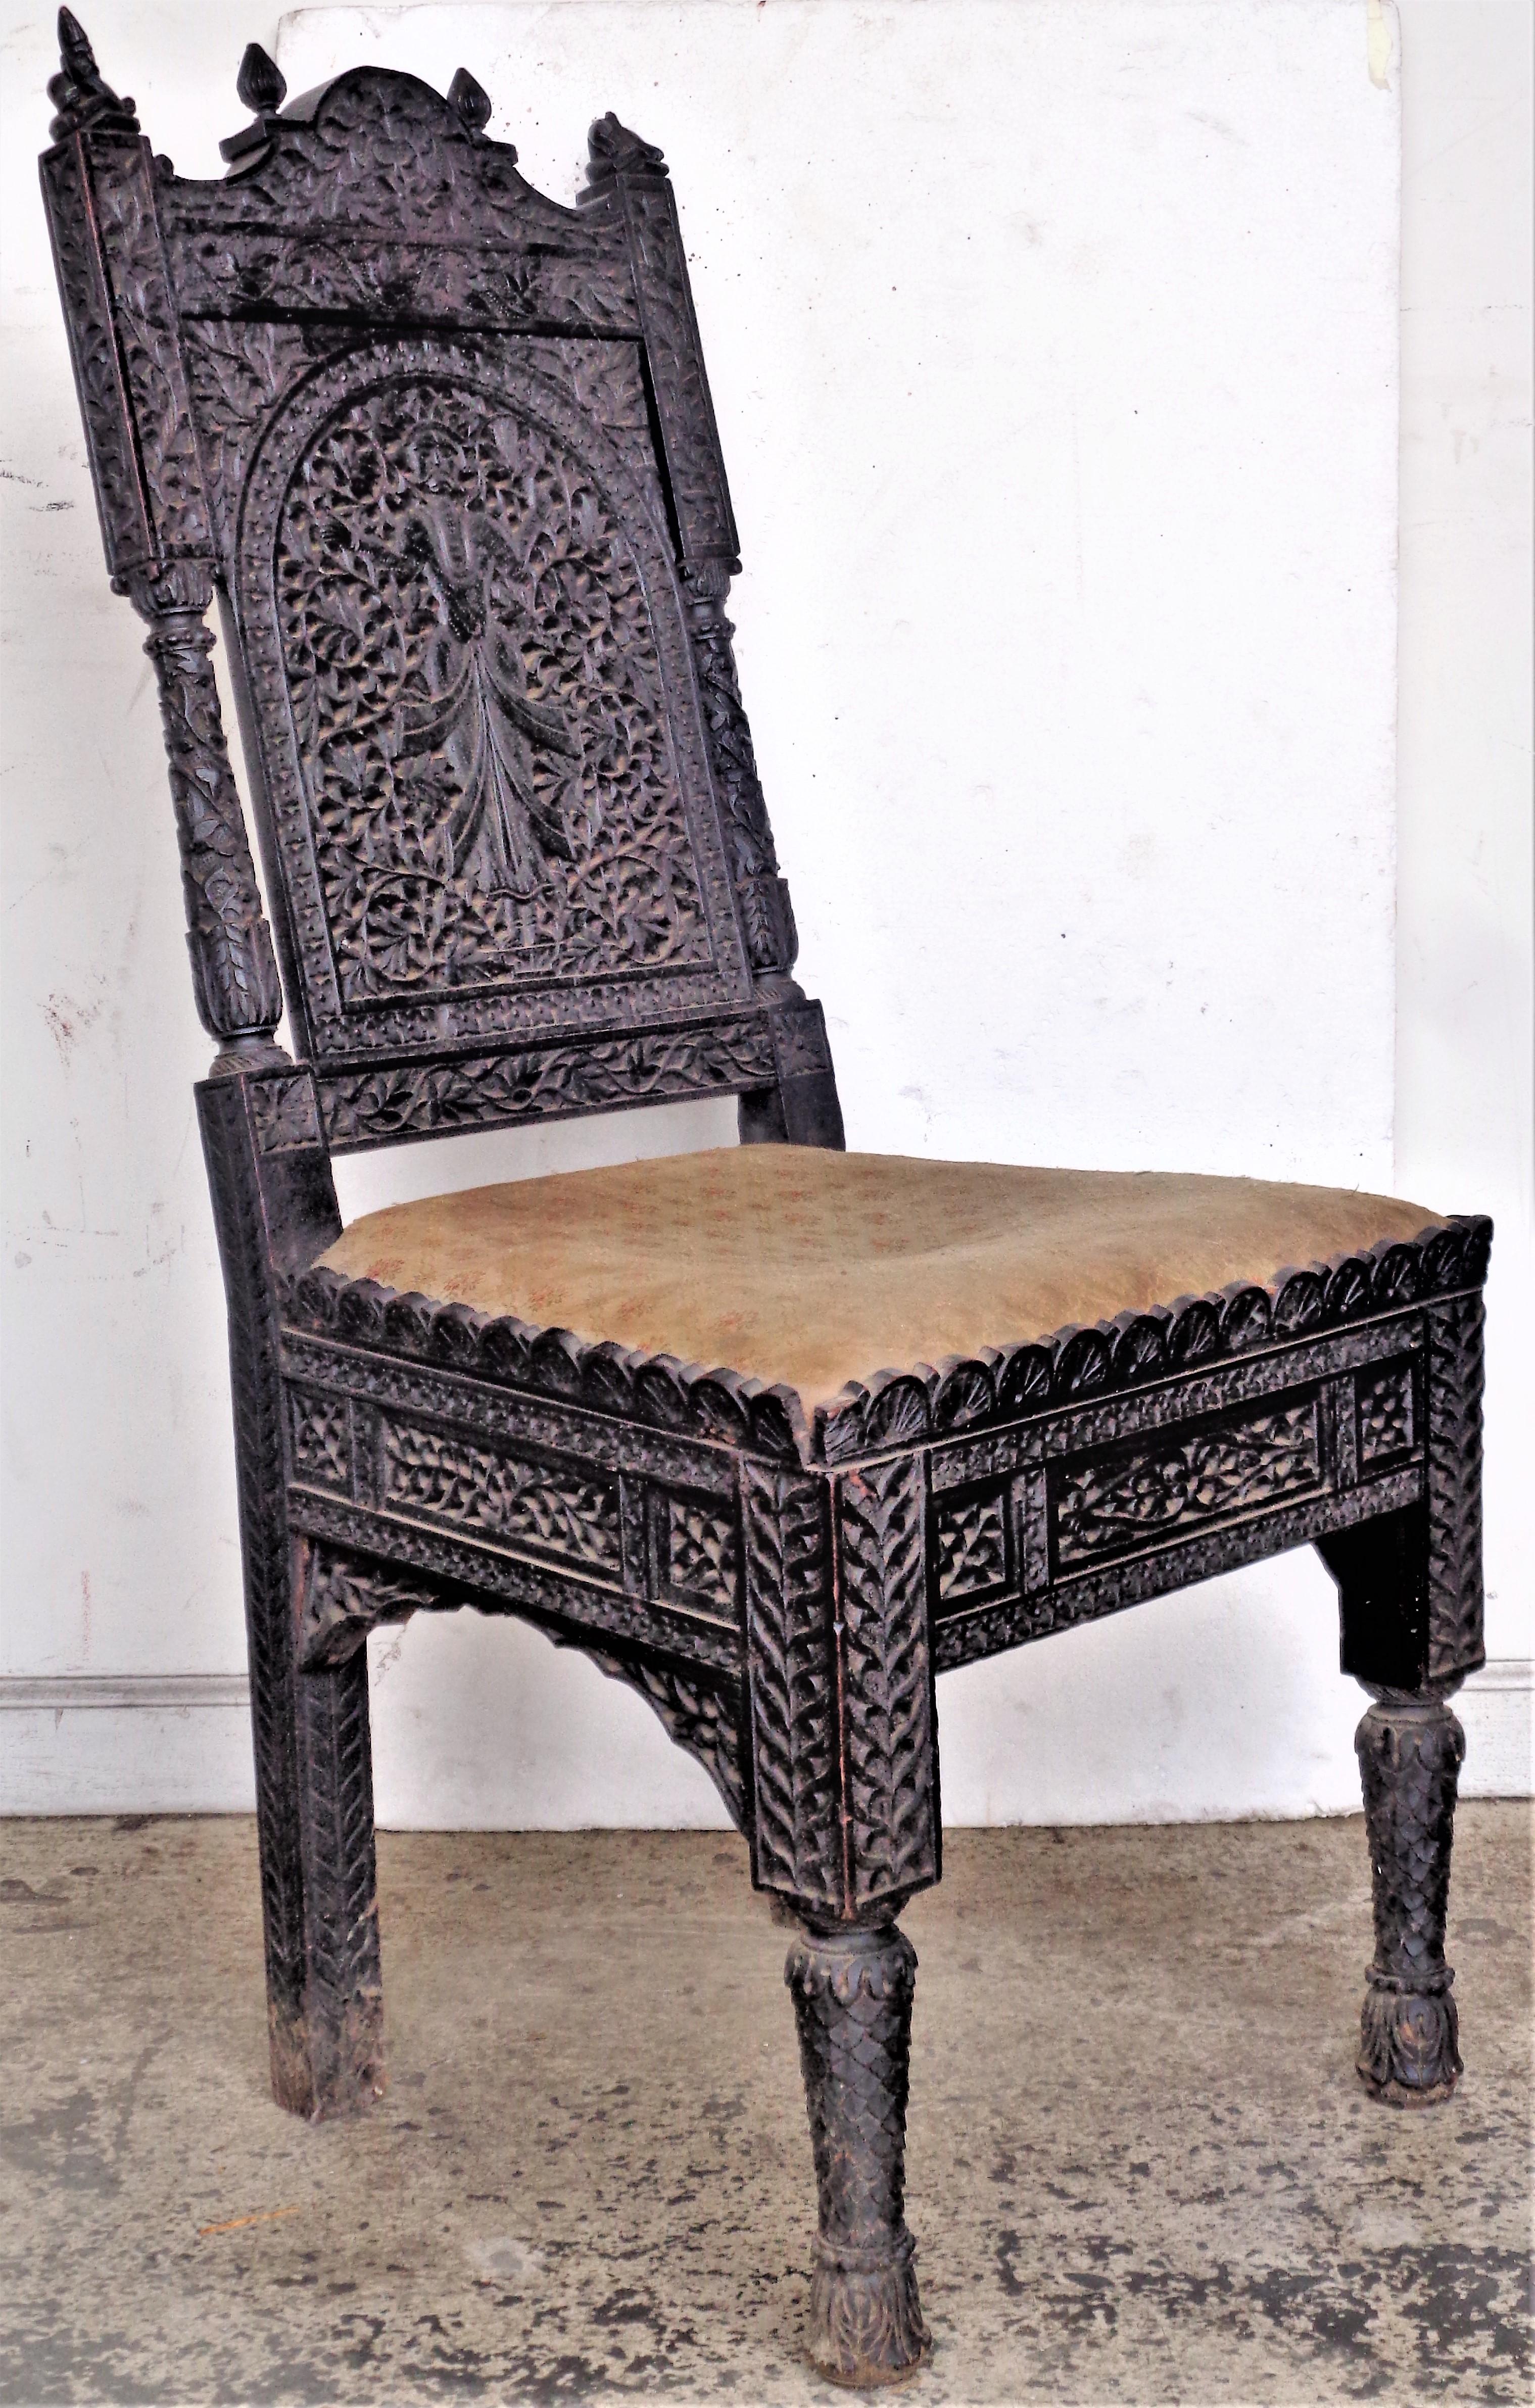 Upholstery Antique Anglo Indian Chair